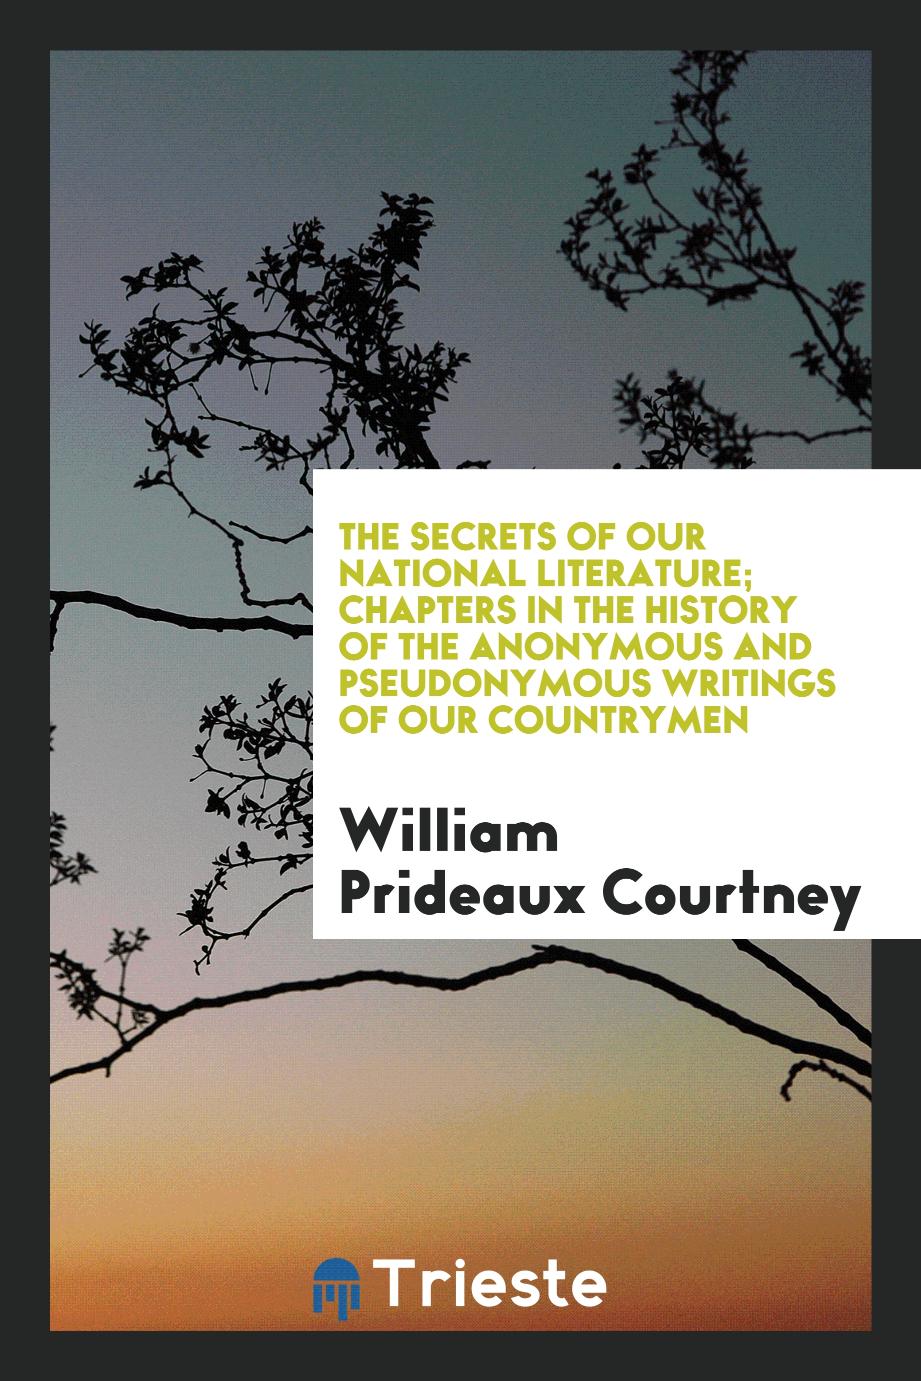 The secrets of our national literature; chapters in the history of the anonymous and pseudonymous writings of our countrymen